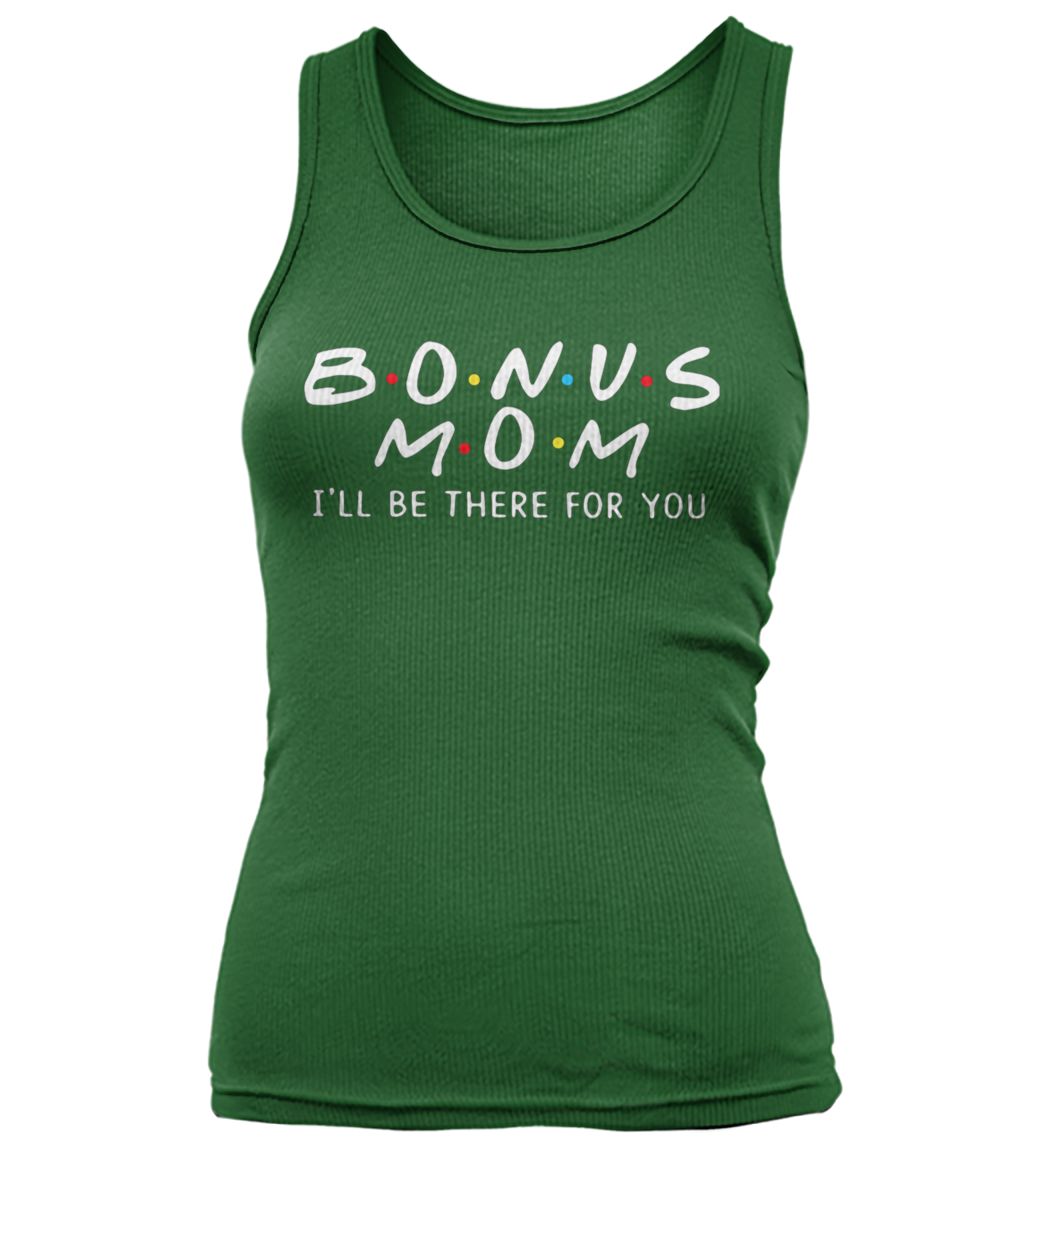 Bonus mom I'll be there for you women's tank top